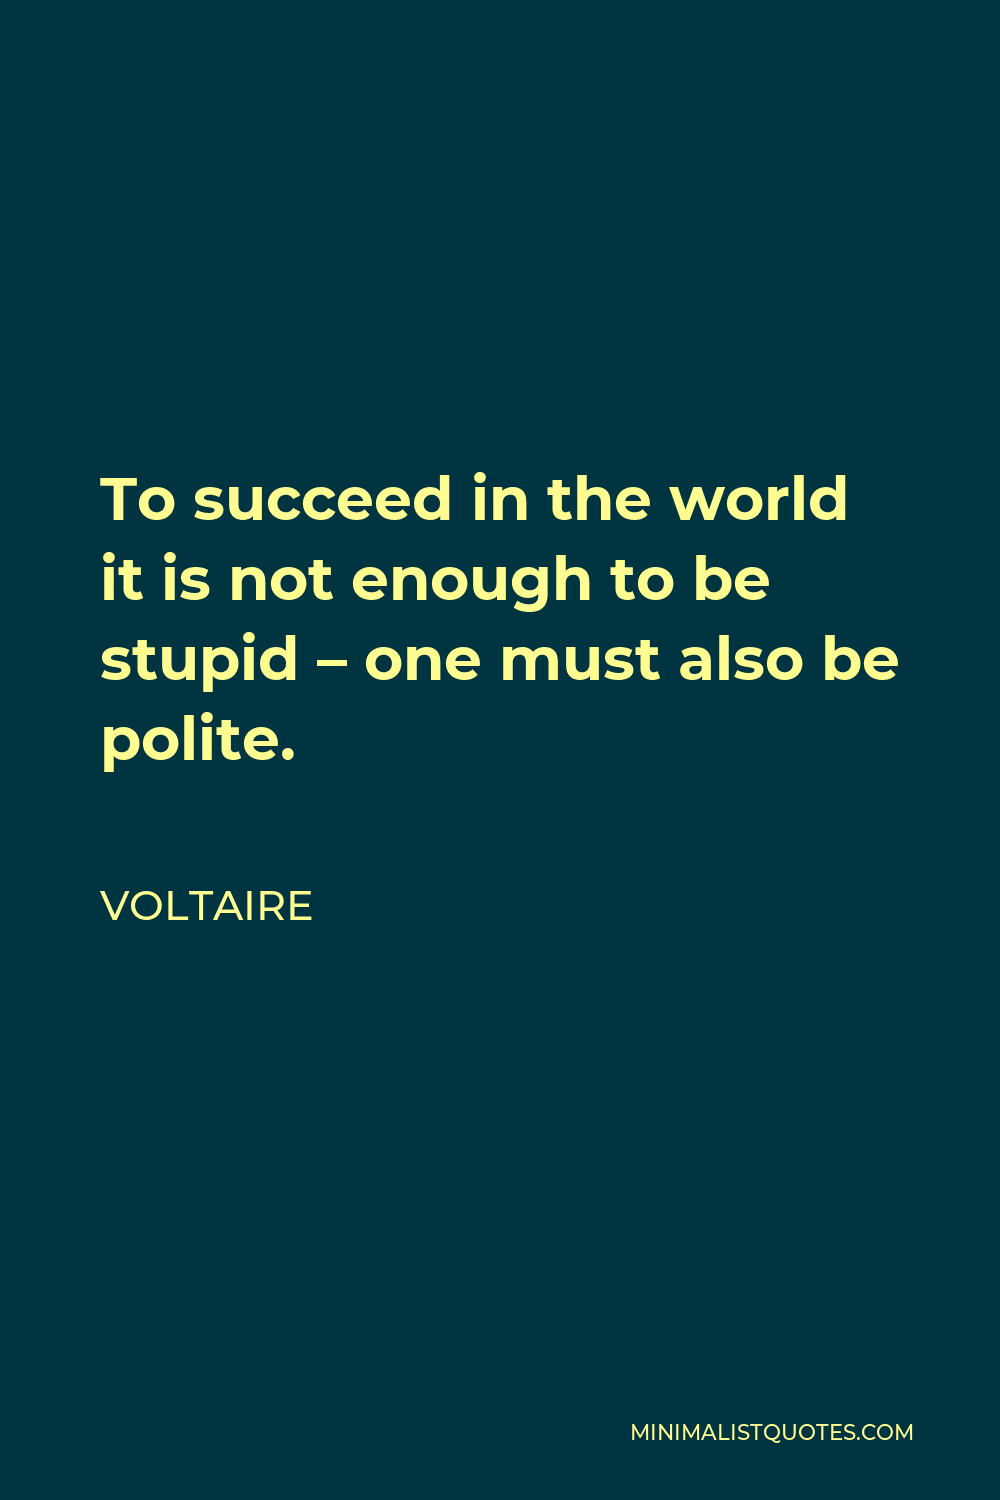 Voltaire Quote: To succeed in the world it is not enough to be stupid ...